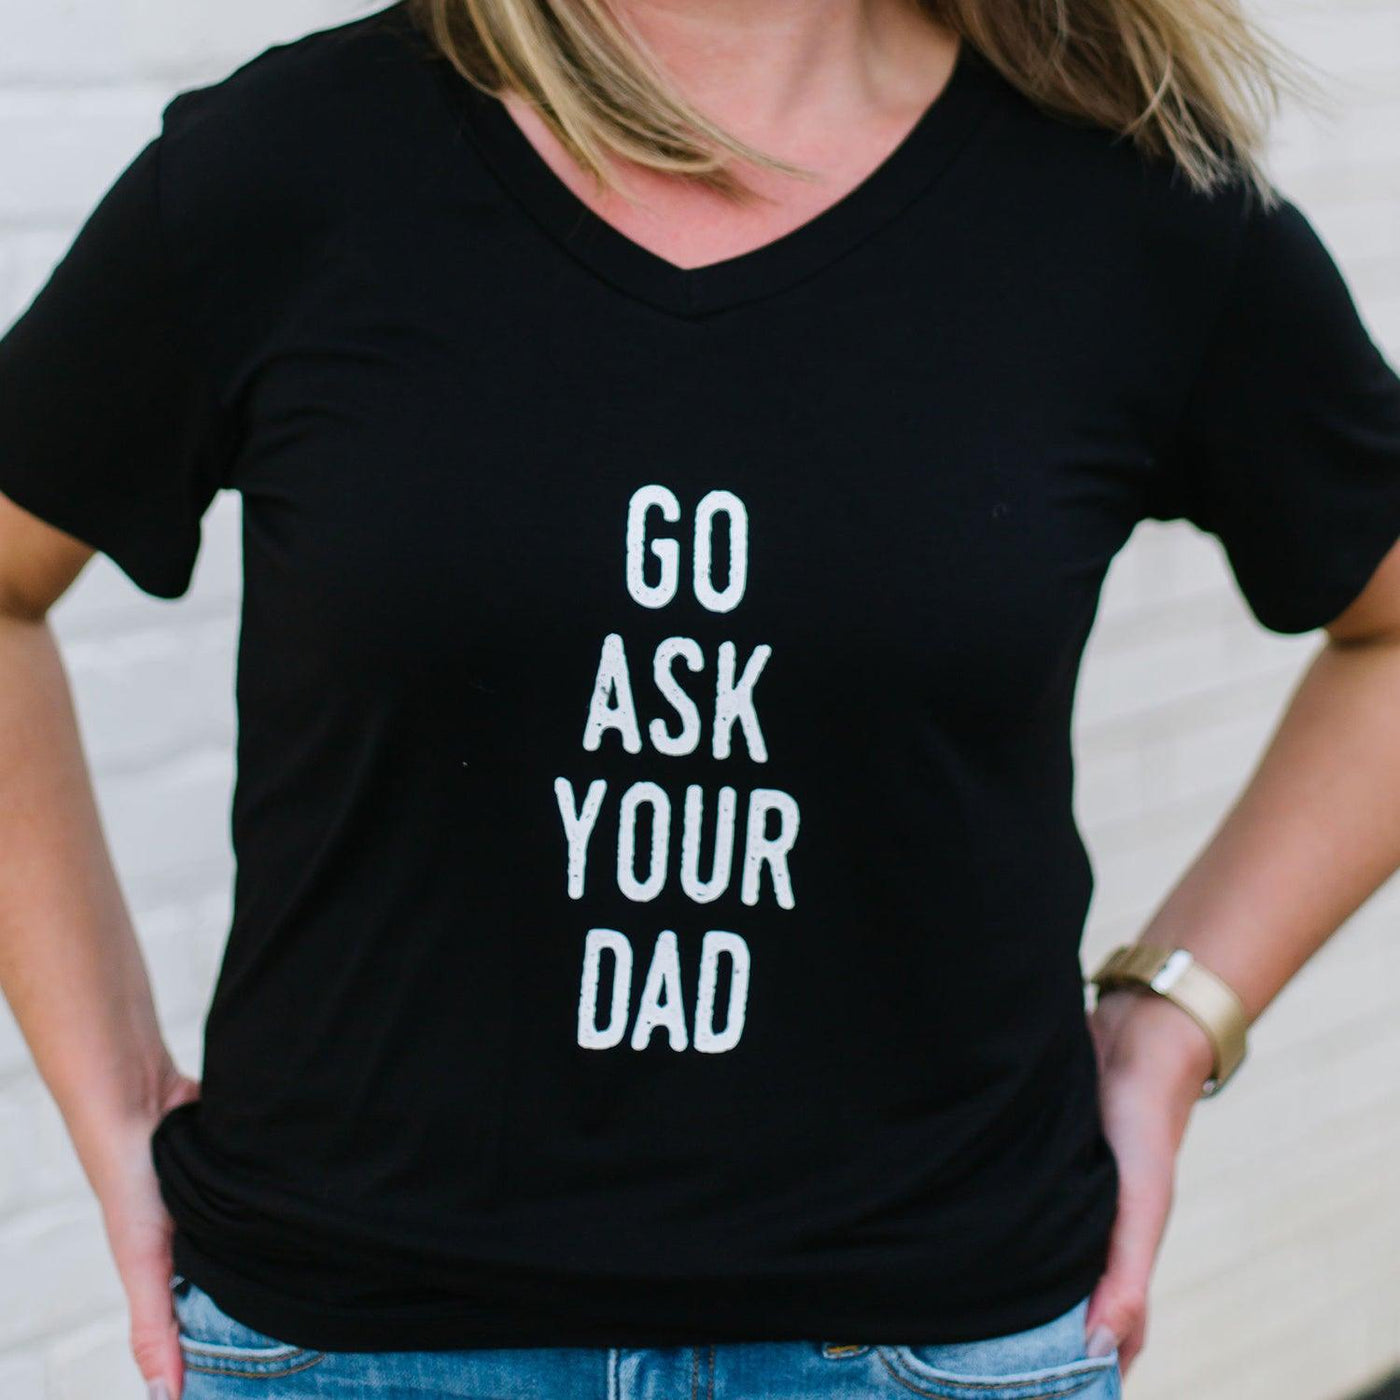 FINAL SALE - Go Ask Your Dad | Tee - Mary Square, LLC